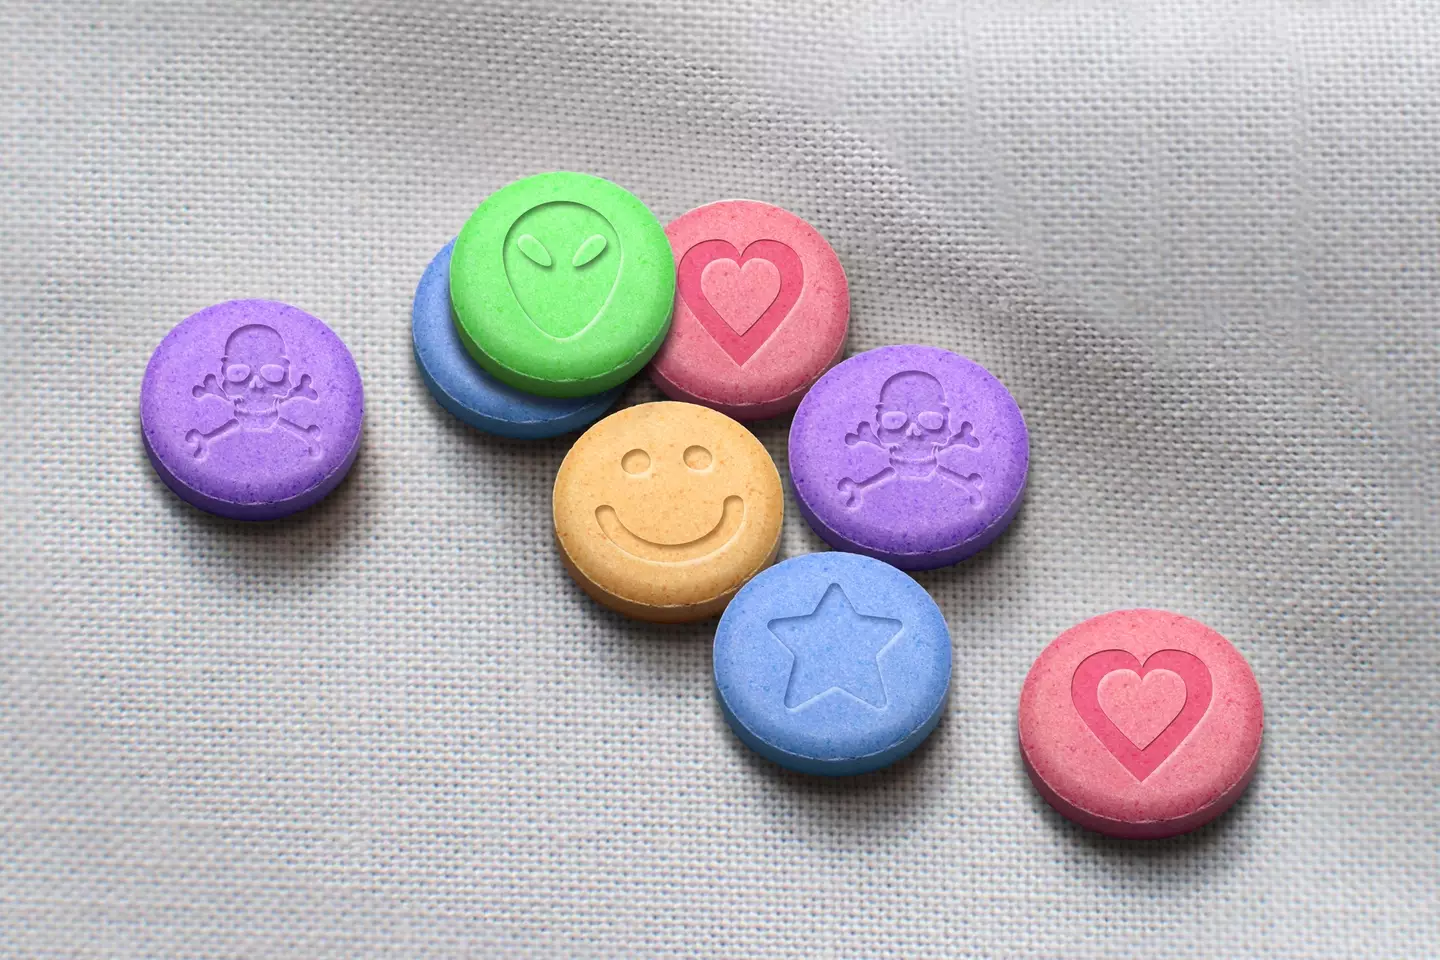 Research conducted by The Loop has found the strength of ecstasy is increasing. (Getty Stock Images)